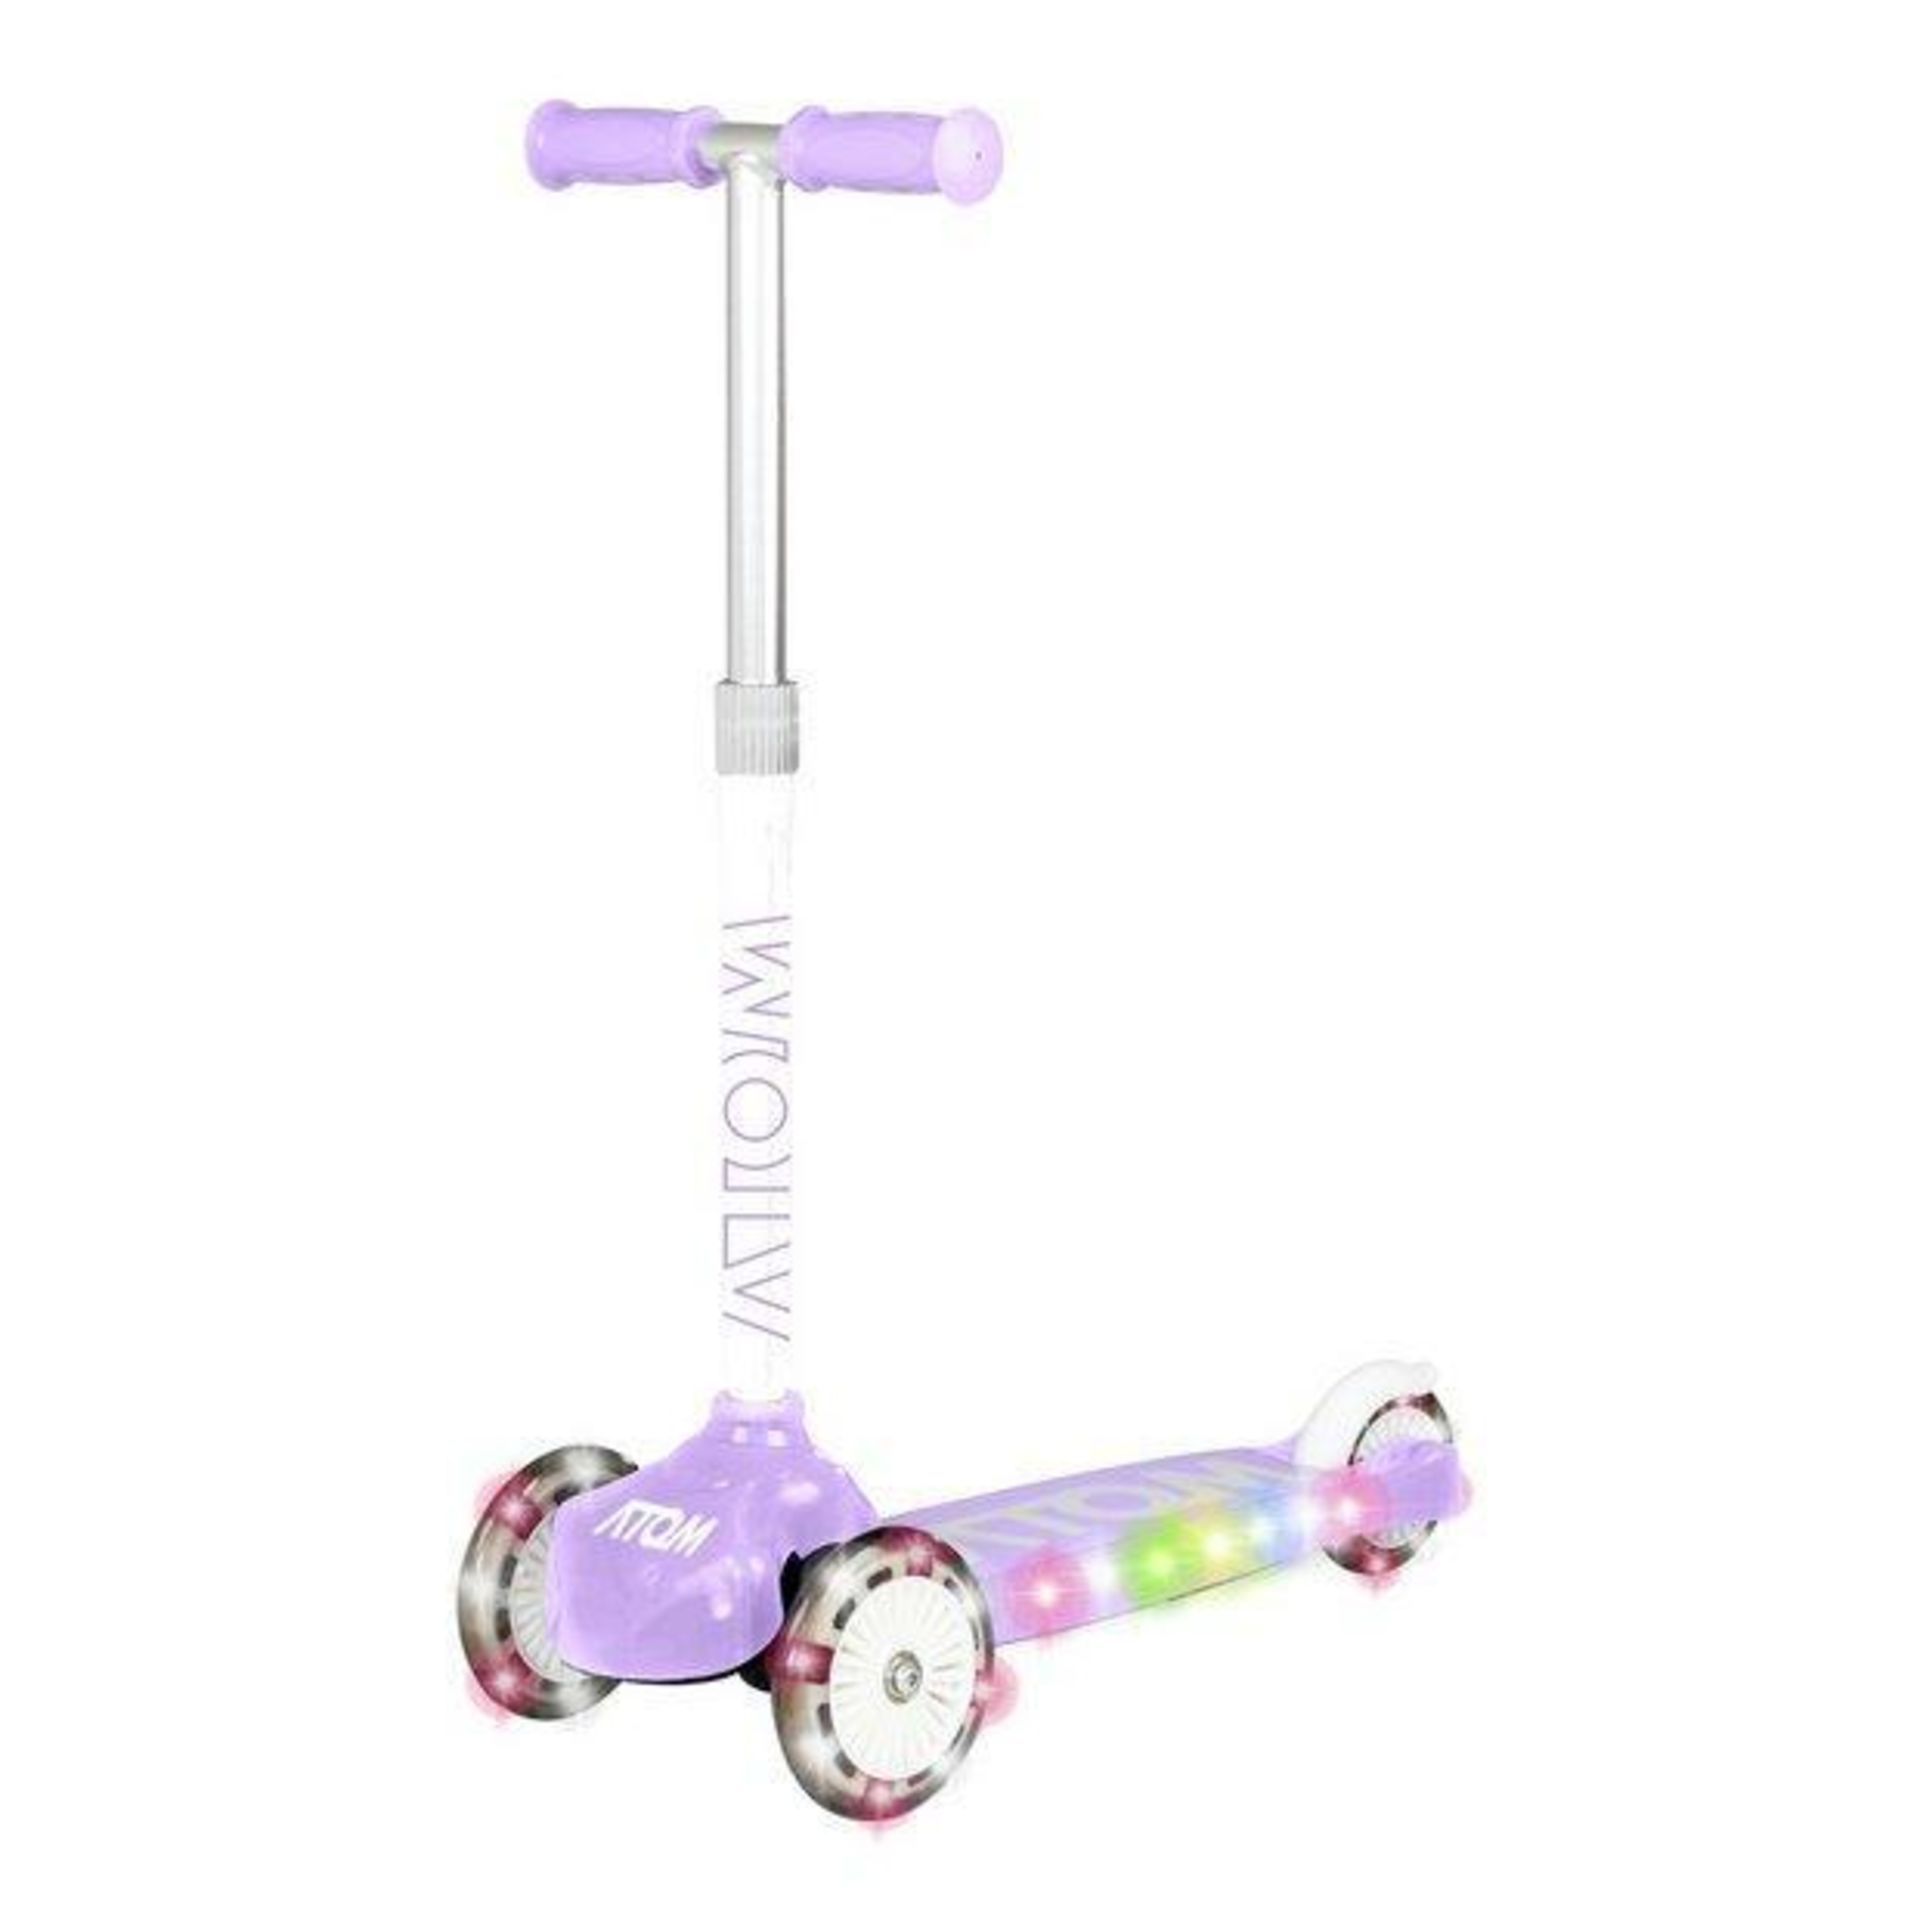 Atom Light Up Tri Scooter 893/5641 £24.99 RRP